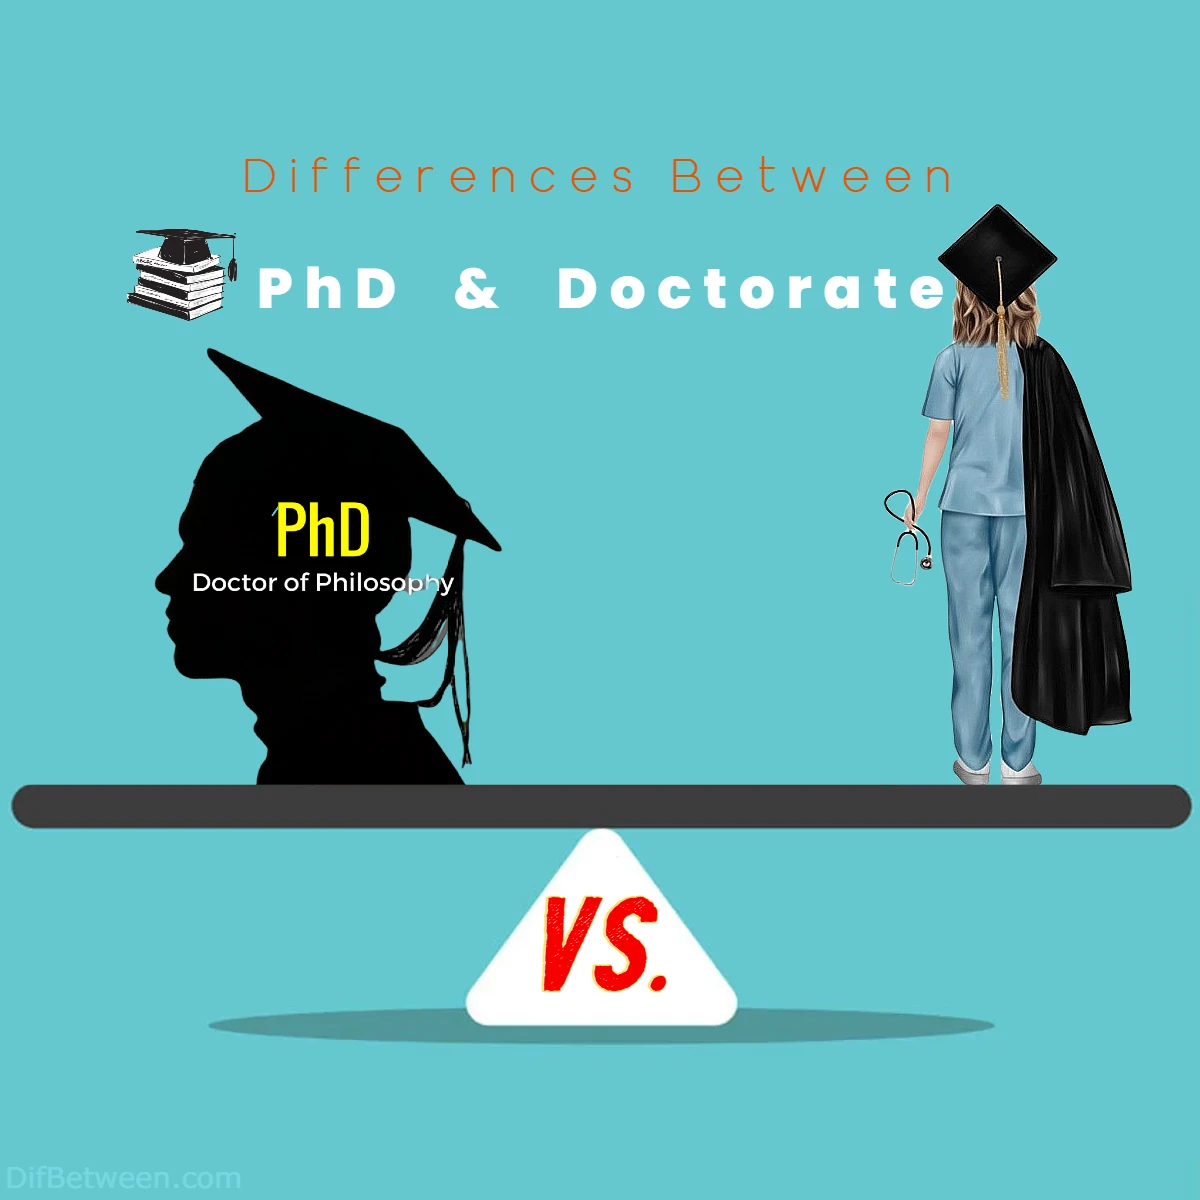 Differences Between PhD vs Doctorate